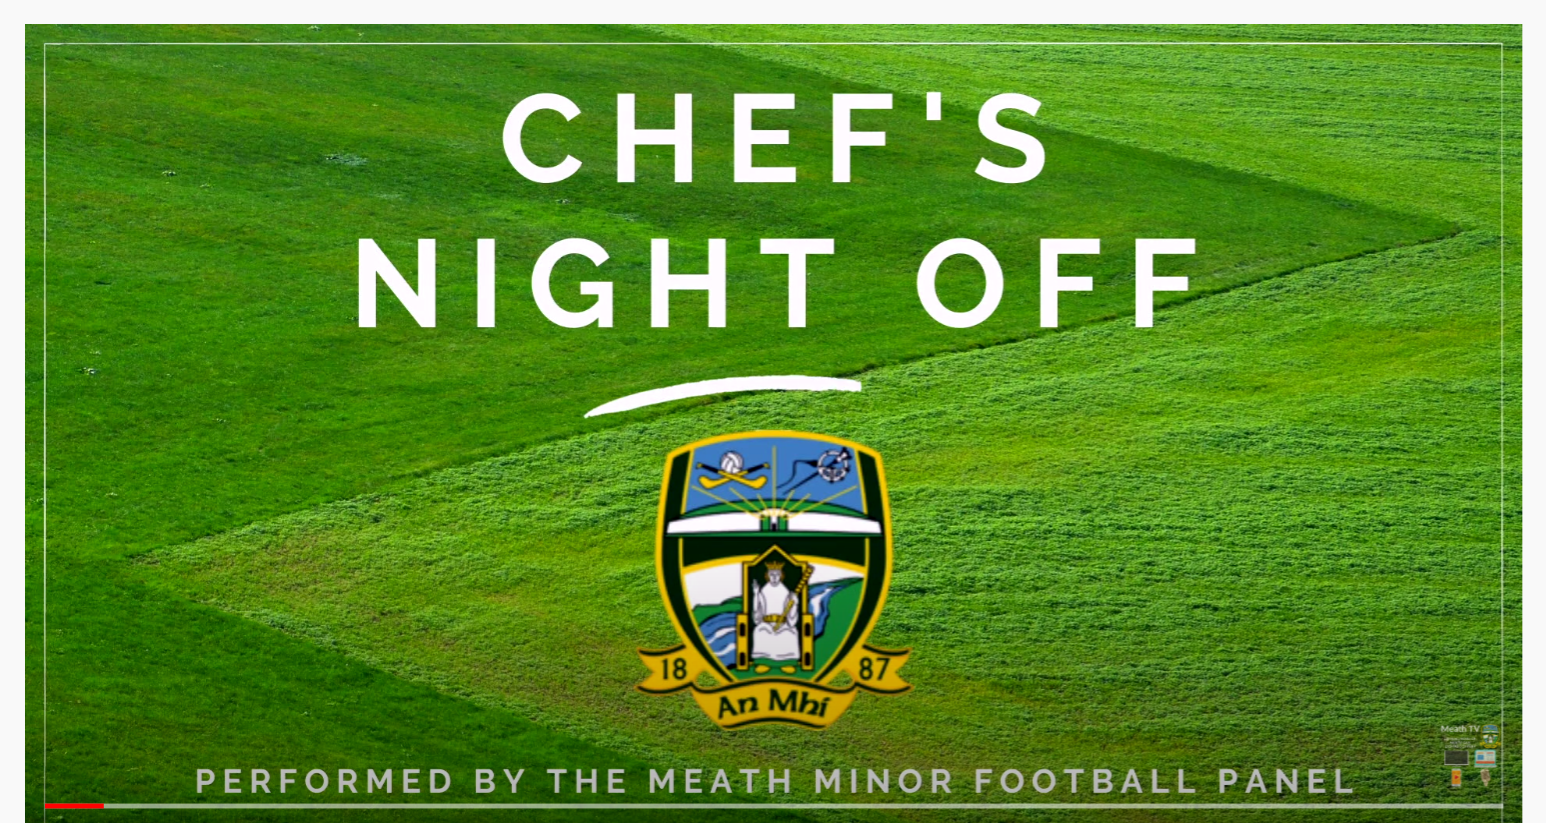 Meath Minor Footballers Cooking Challenge – Chef’s Night Off